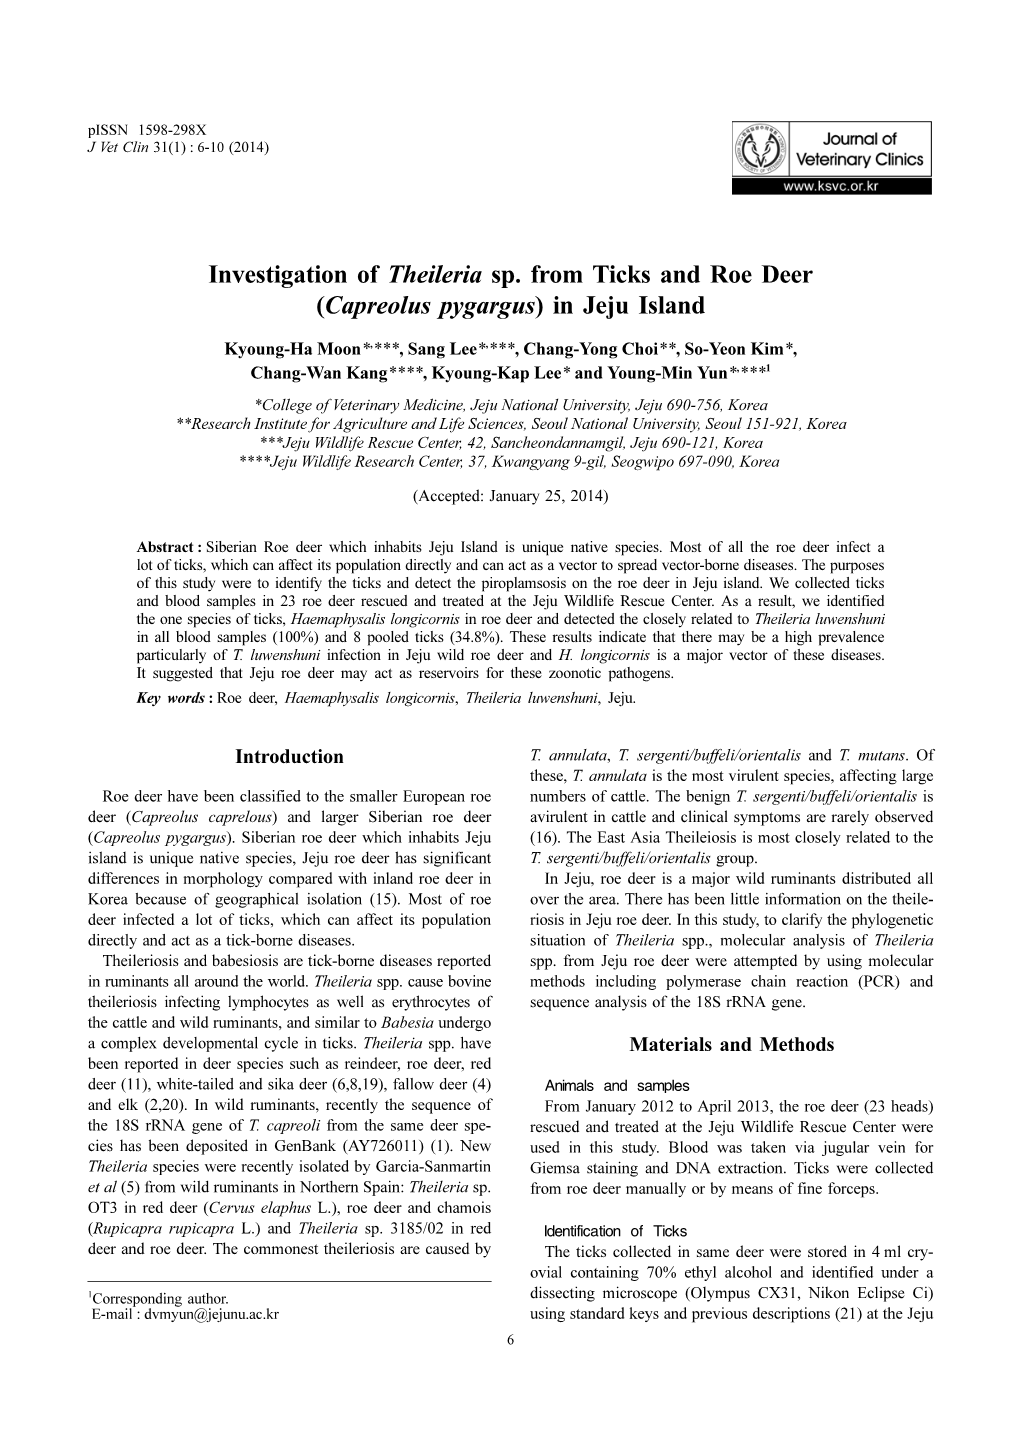 Investigation of Theileria Sp. from Ticks and Roe Deer (Capreolus Pygargus) in Jeju Island